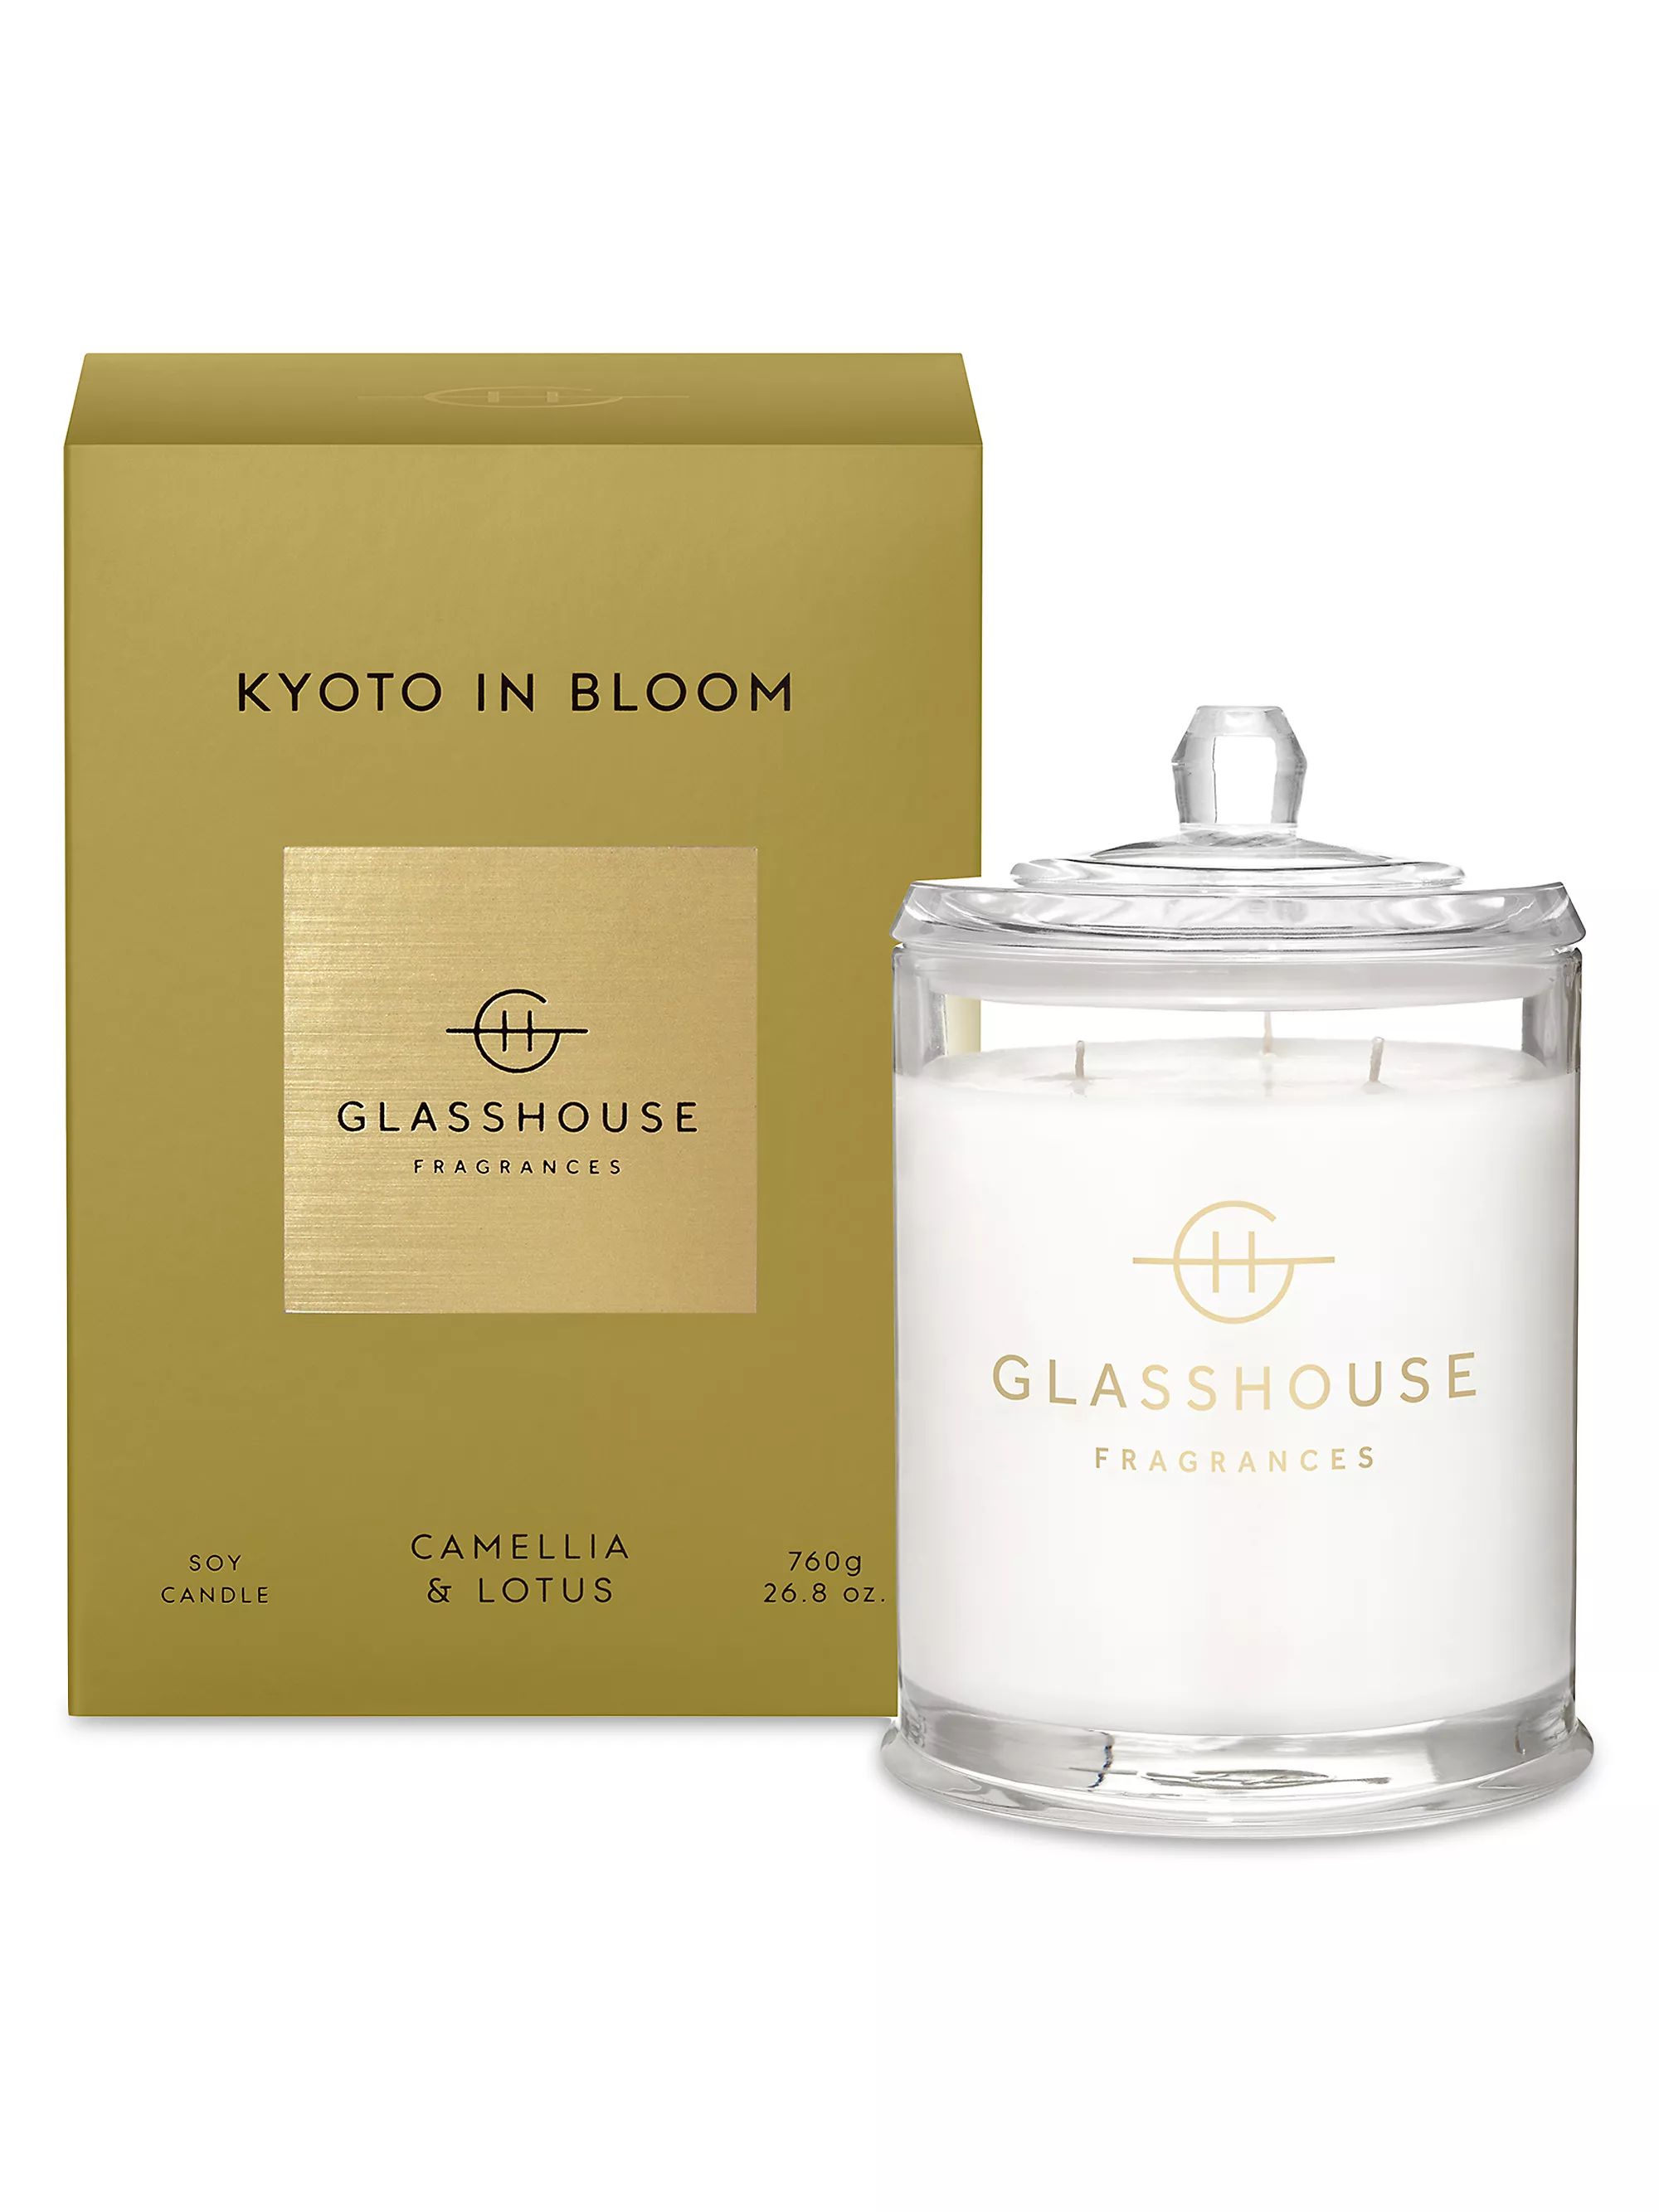 Glasshouse Fragrances Kyoto In Bloom Soy Candle | Saks Fifth Avenue